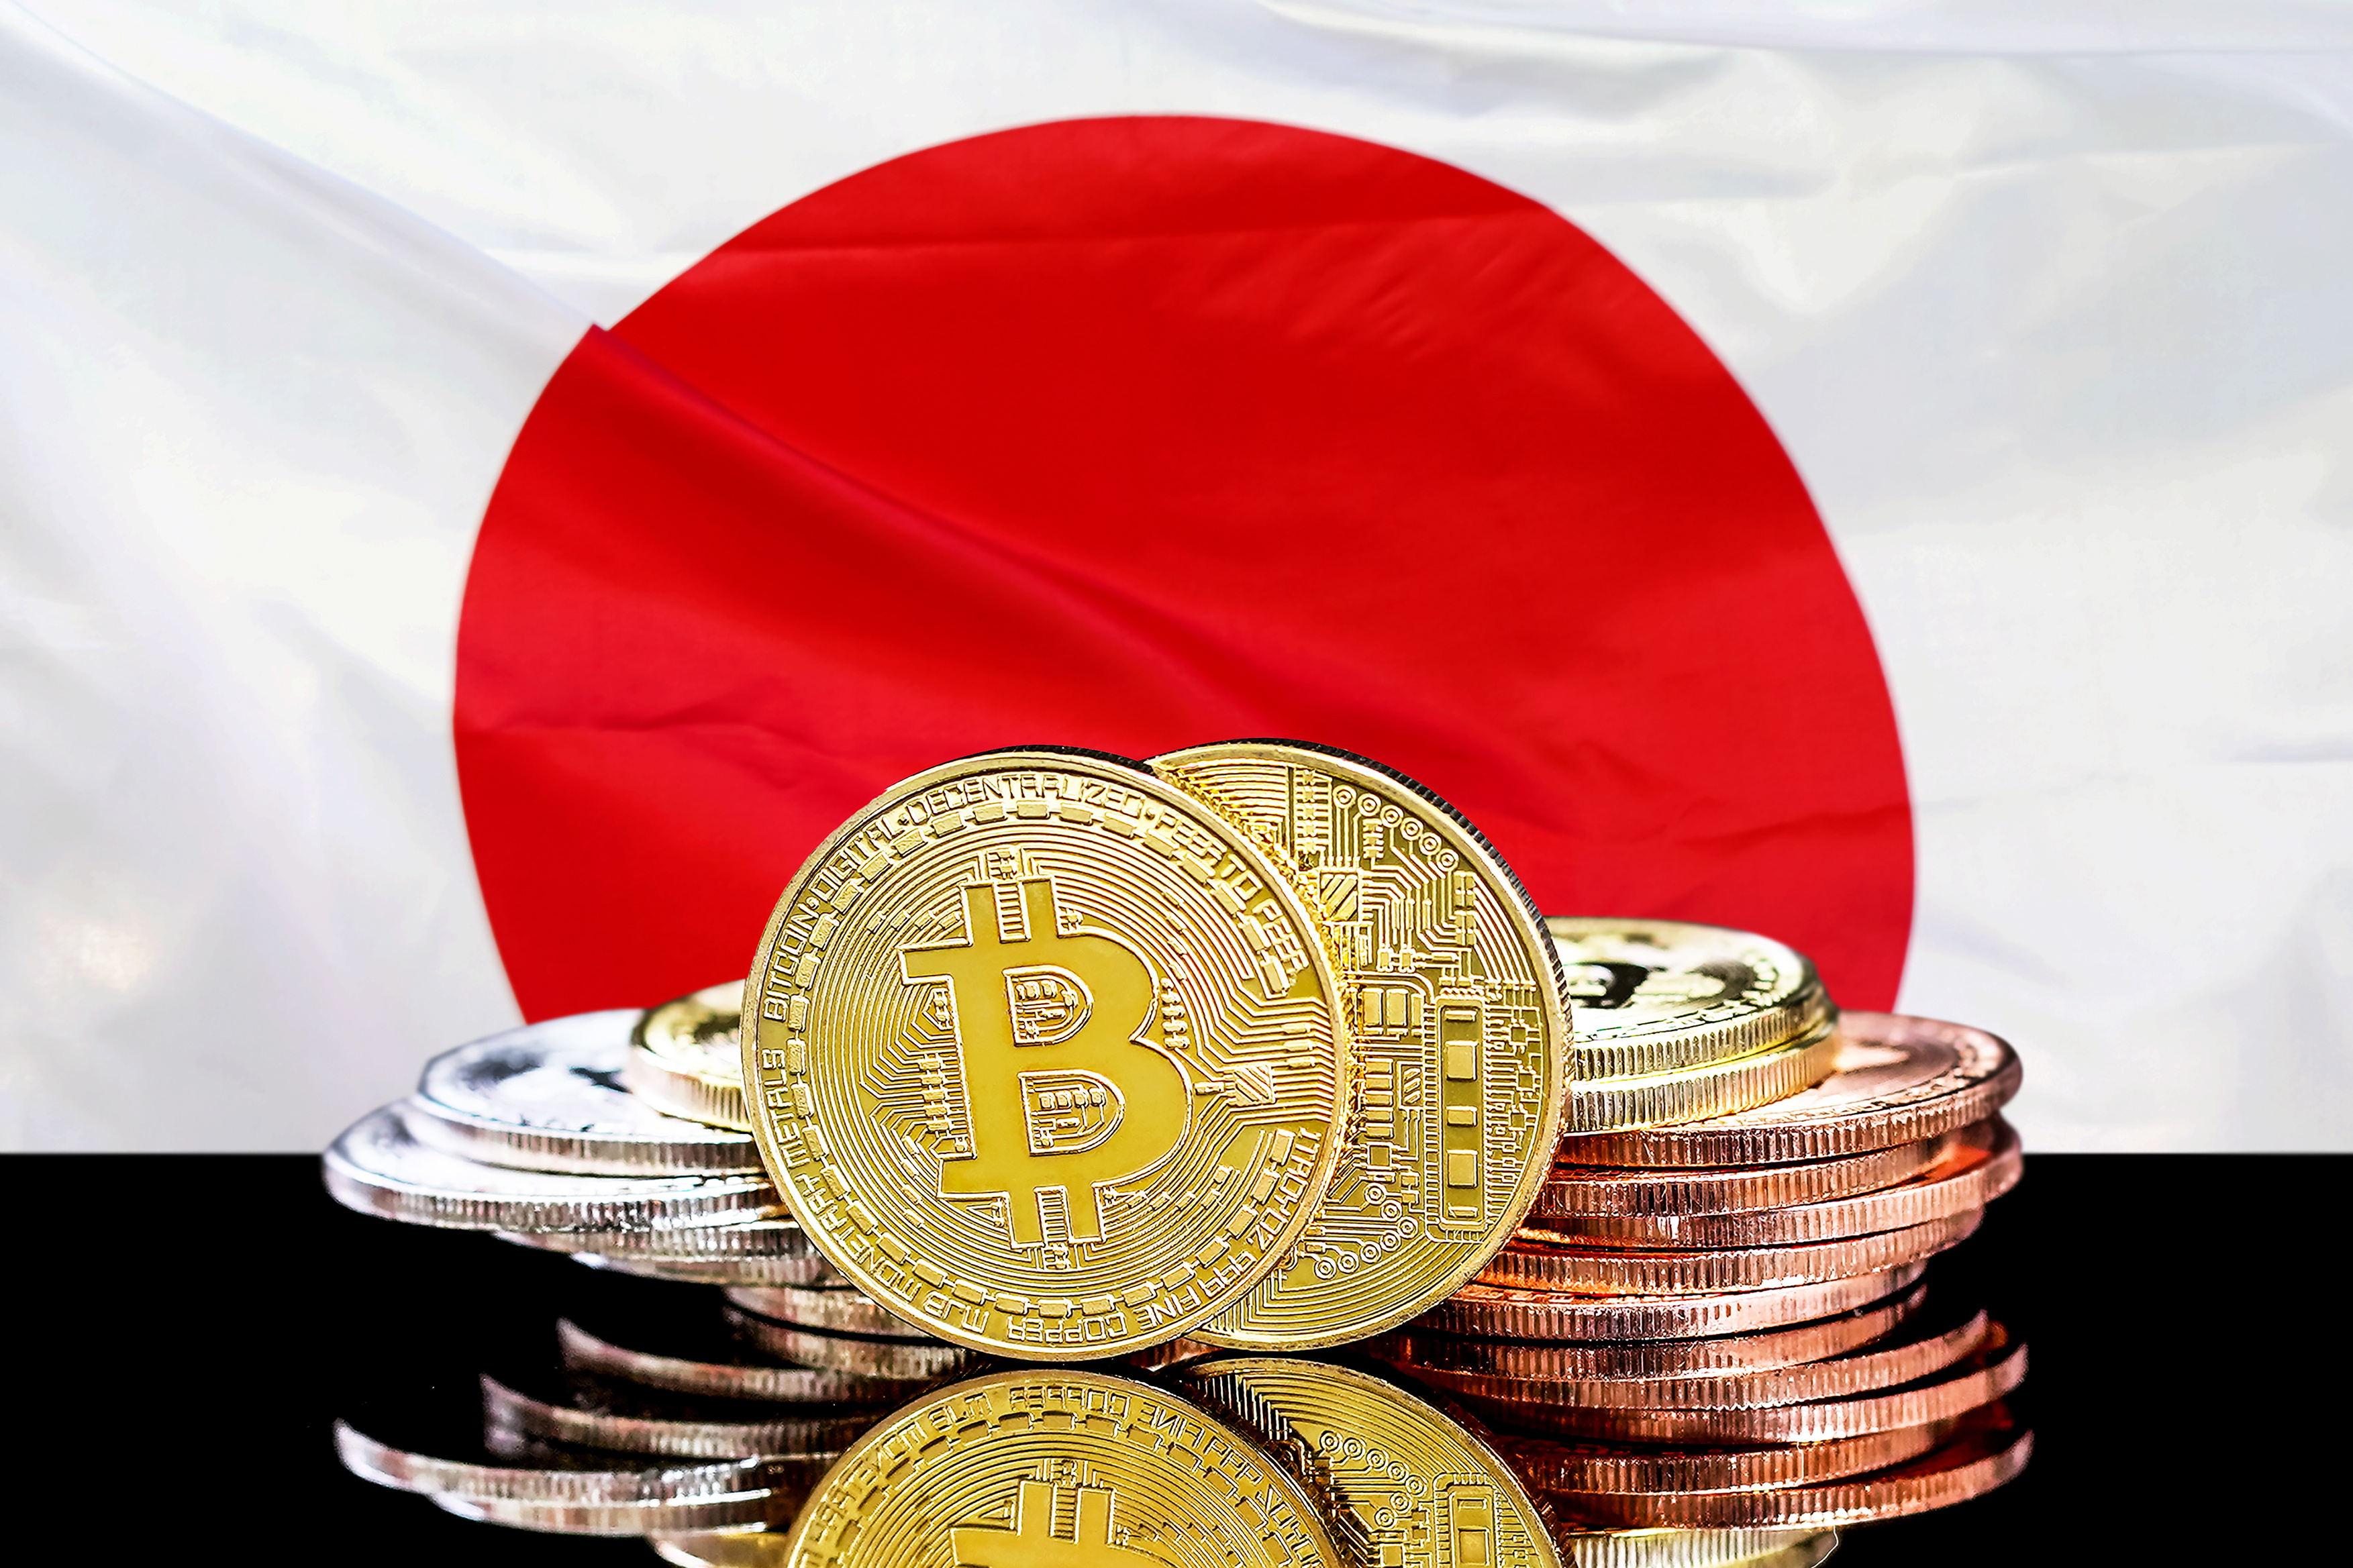 A pile of tokens representing cryptocurrencies rest on a table in front of the Japanese flag.